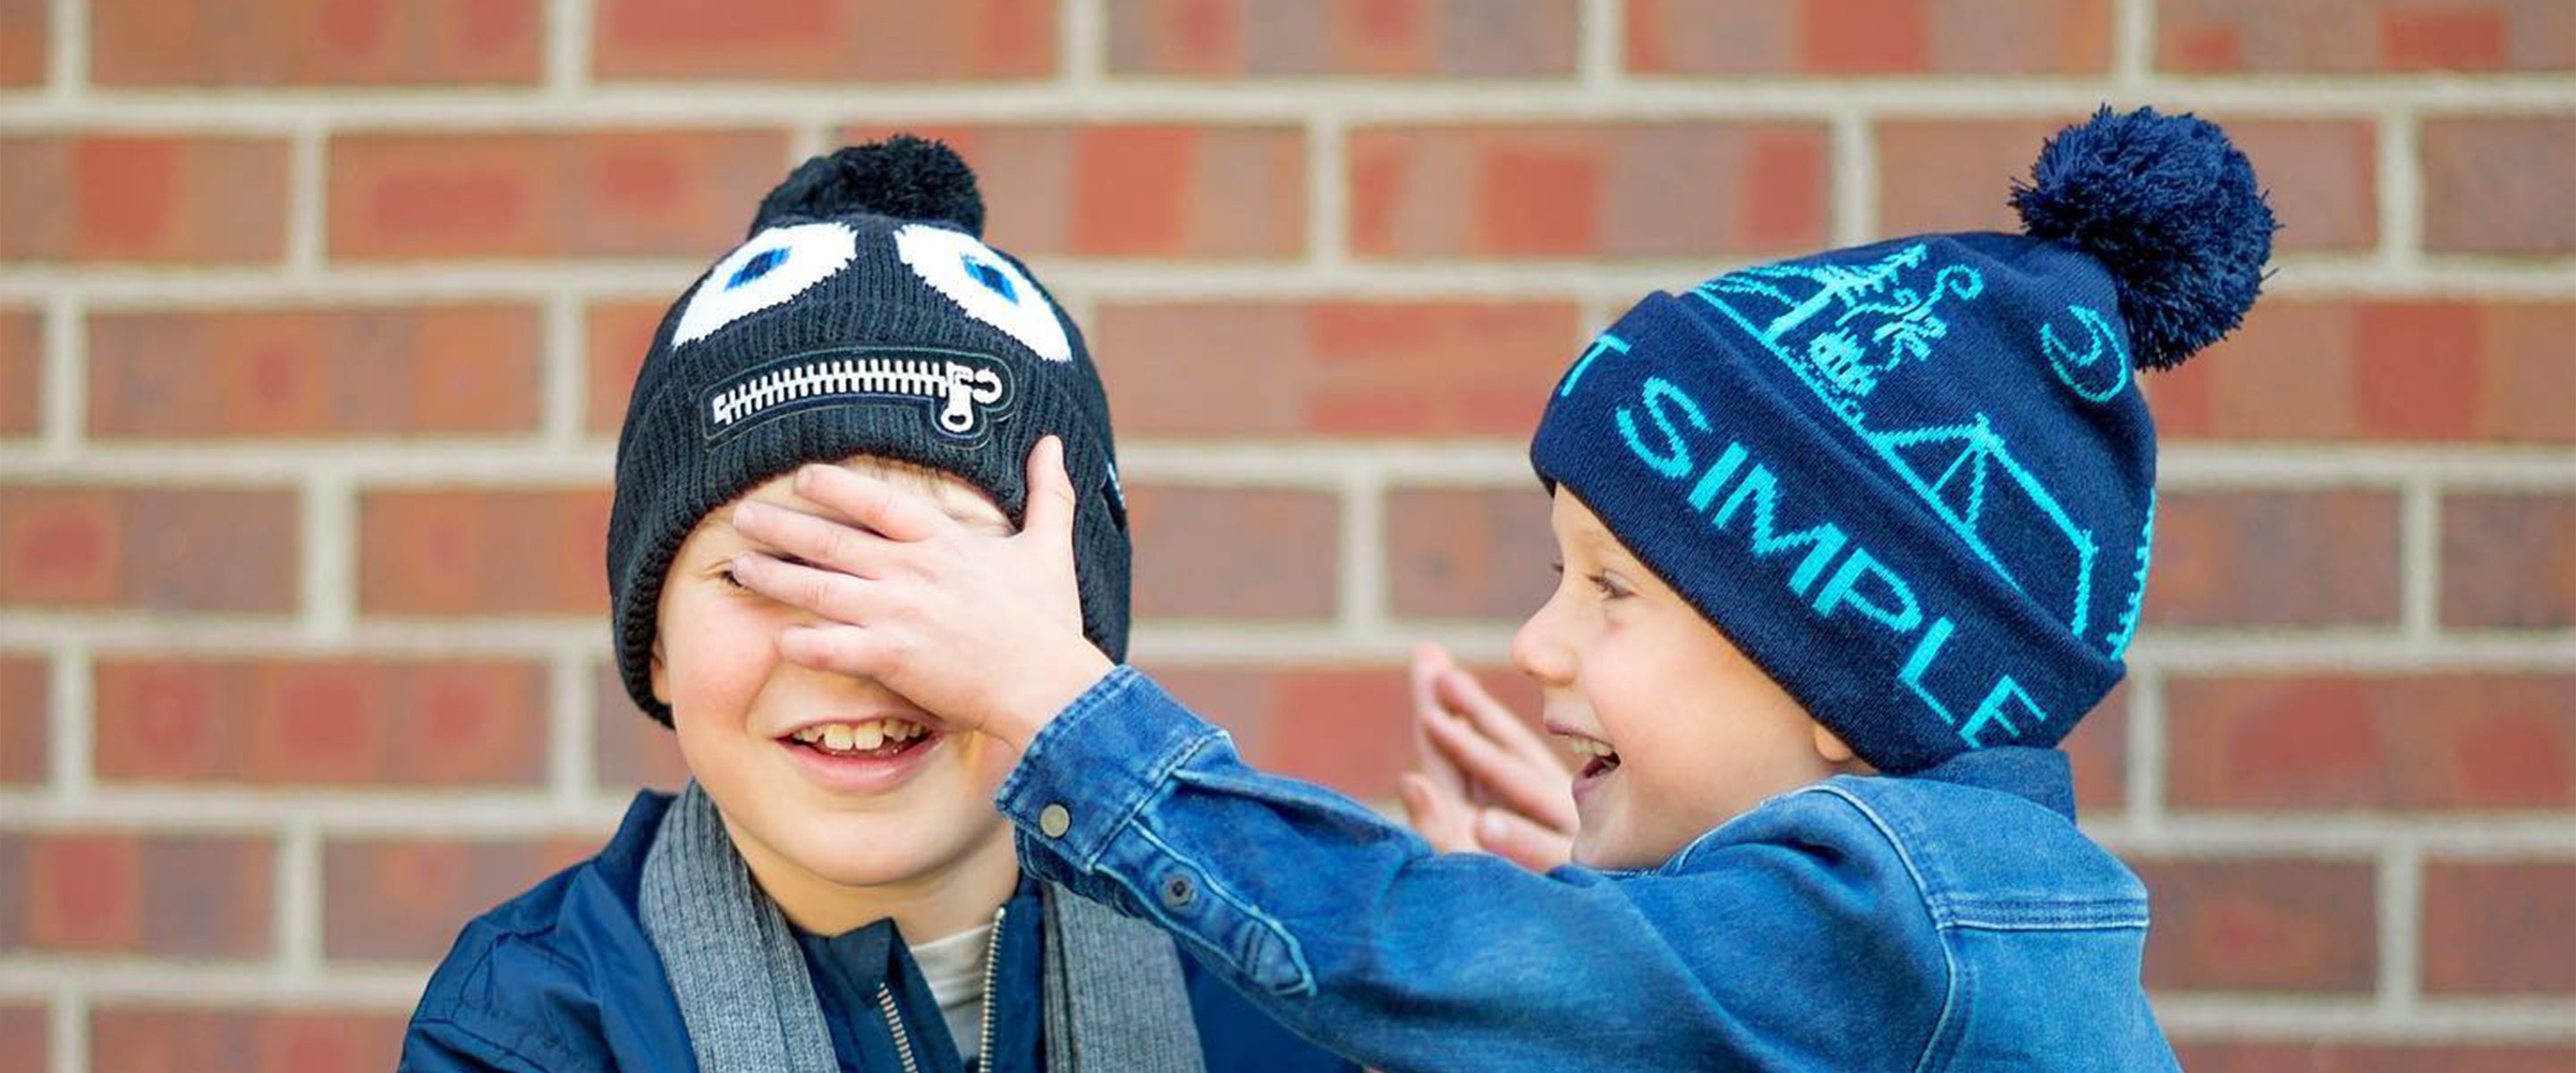 Bula - Neckwarmers and Oberson – Beanies Kids for